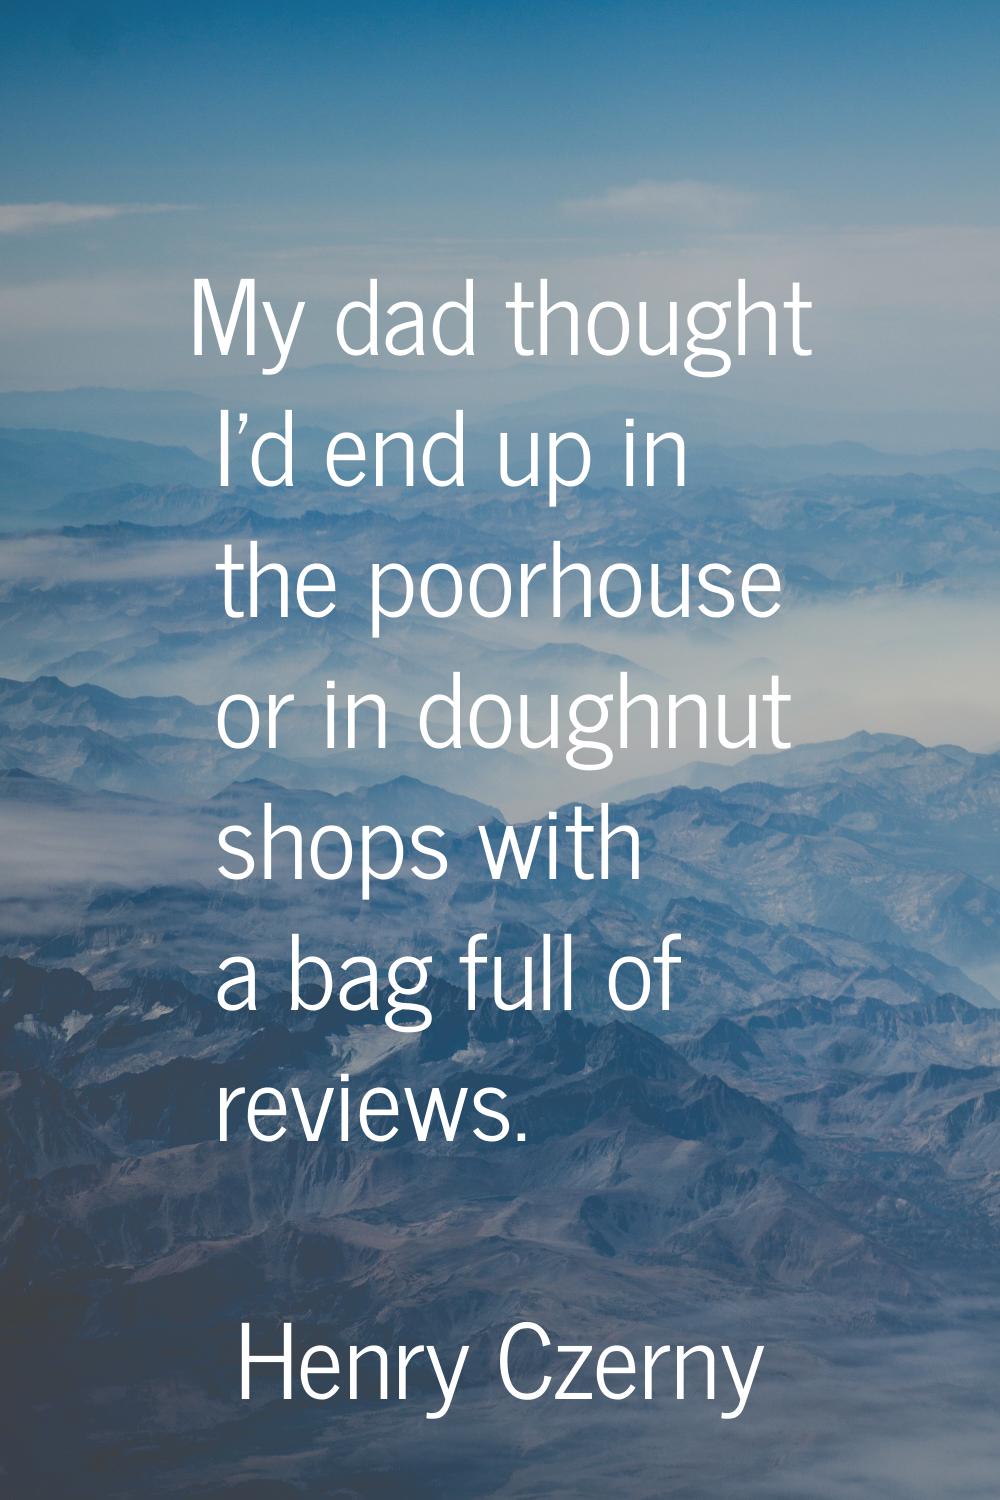 My dad thought I'd end up in the poorhouse or in doughnut shops with a bag full of reviews.